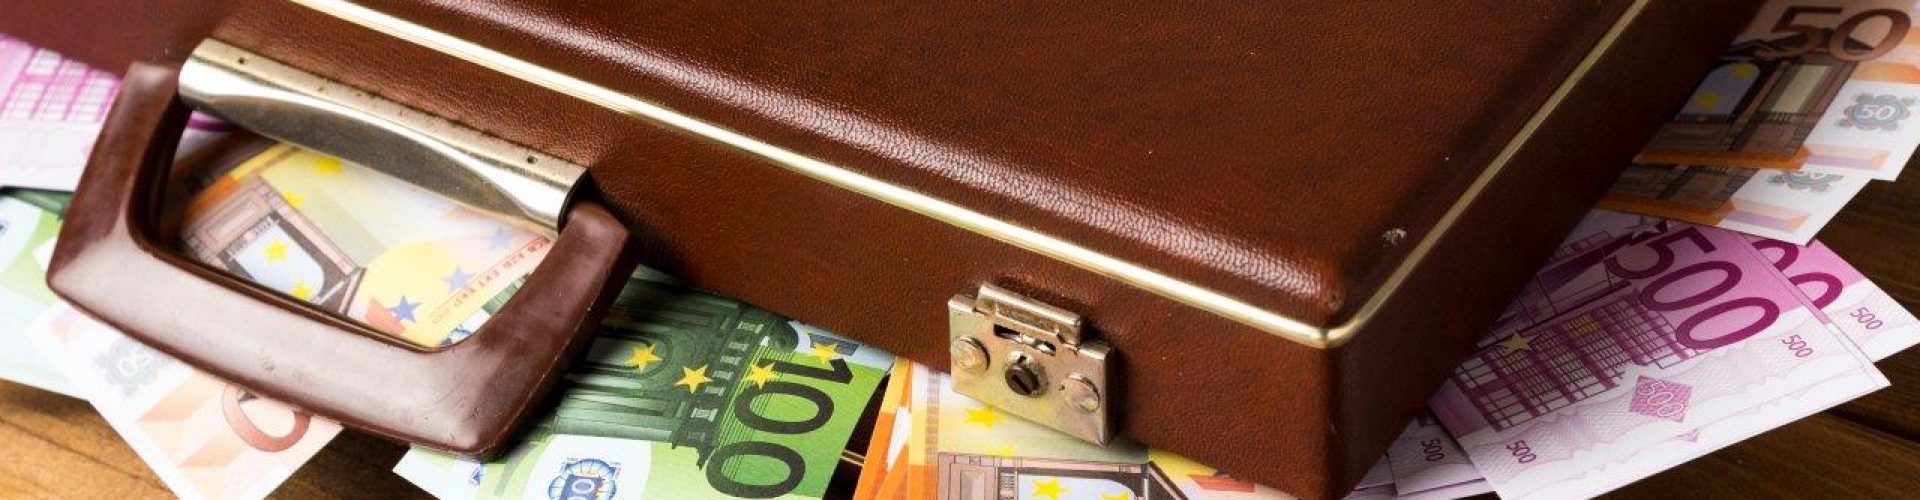 close-up-closed-suitcase-with-banknotes-inside